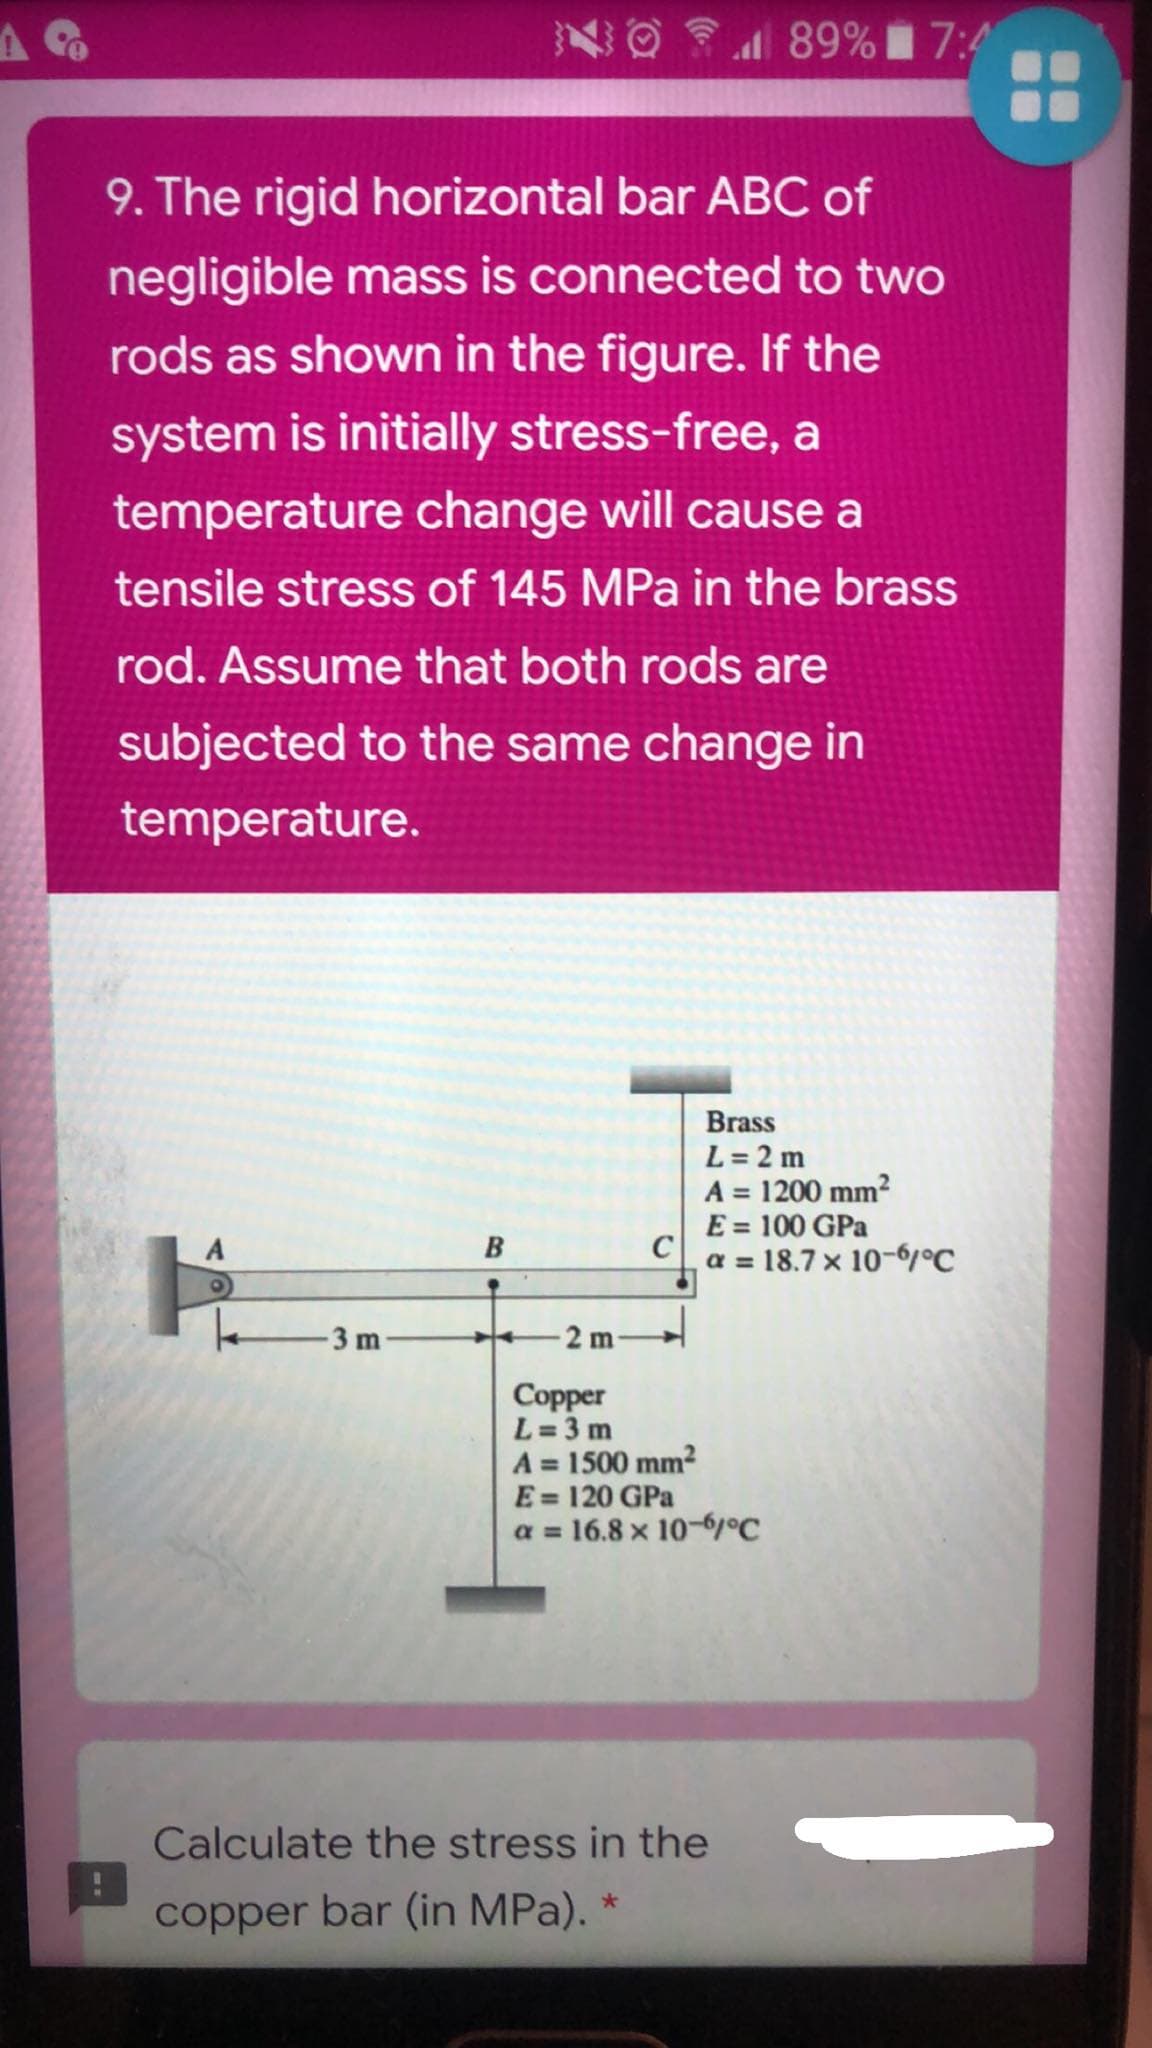 NO 89% 7:4
9. The rigid horizontal bar ABC of
negligible mass is connected to two
rods as shown in the figure. If the
system is initially stress-free, a
temperature change will cause a
tensile stress of 145 MPa in the brass
rod. Assume that both rods are
subjected to the same change in
temperature.
Brass
L = 2 m
A = 1200 mm?
E = 100 GPa
C
a = 18.7 x 10-6°C
%3D
3 m
2 m
Copper
L = 3 m
A = 1500 mm?
E= 120 GPa
a = 16.8 x 10-6°C
Calculate the stress in the
copper bar (in MPa), *
